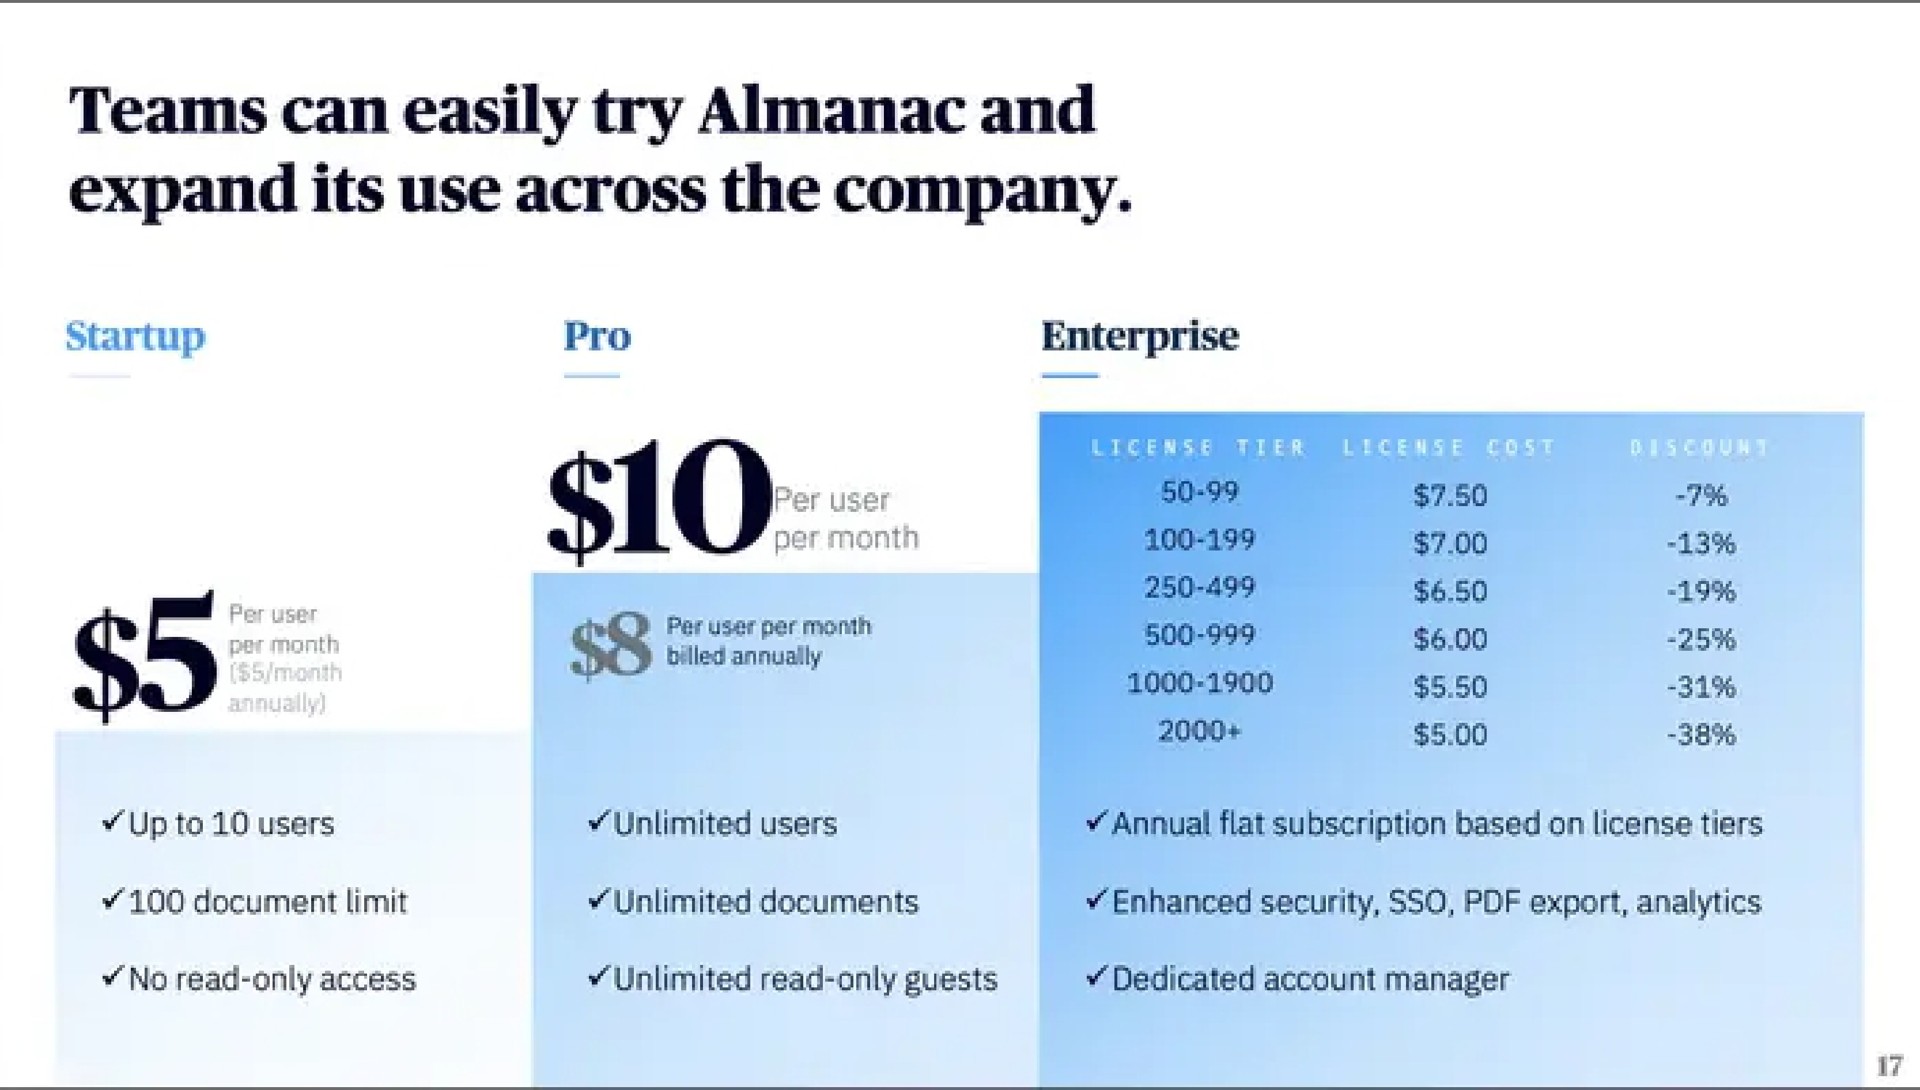 teams can easily try almanac and expand its use across the company | Almanac